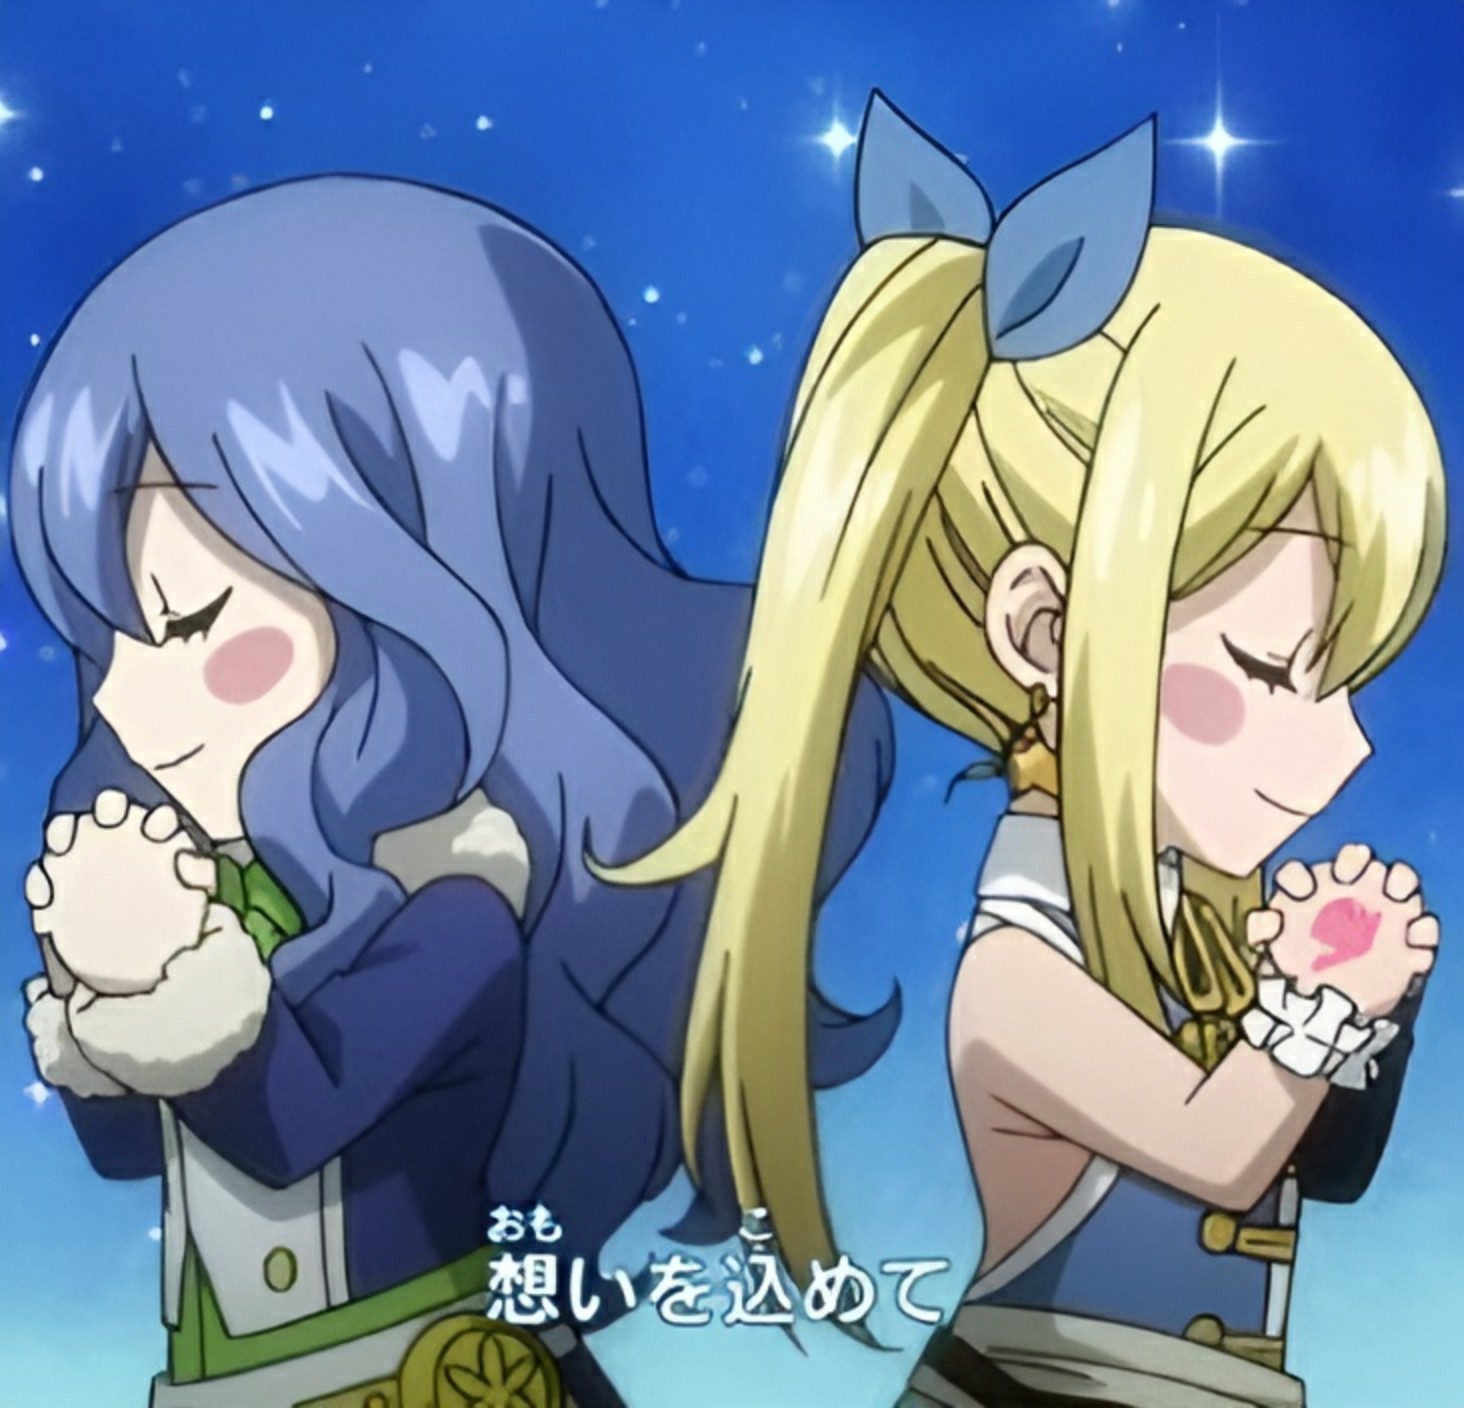 🩵𝐃𝐚𝐢𝐥𝐲 𝐉𝐮𝐯𝐢𝐚🩵 on X: Juvia and Lucy pretty chibis